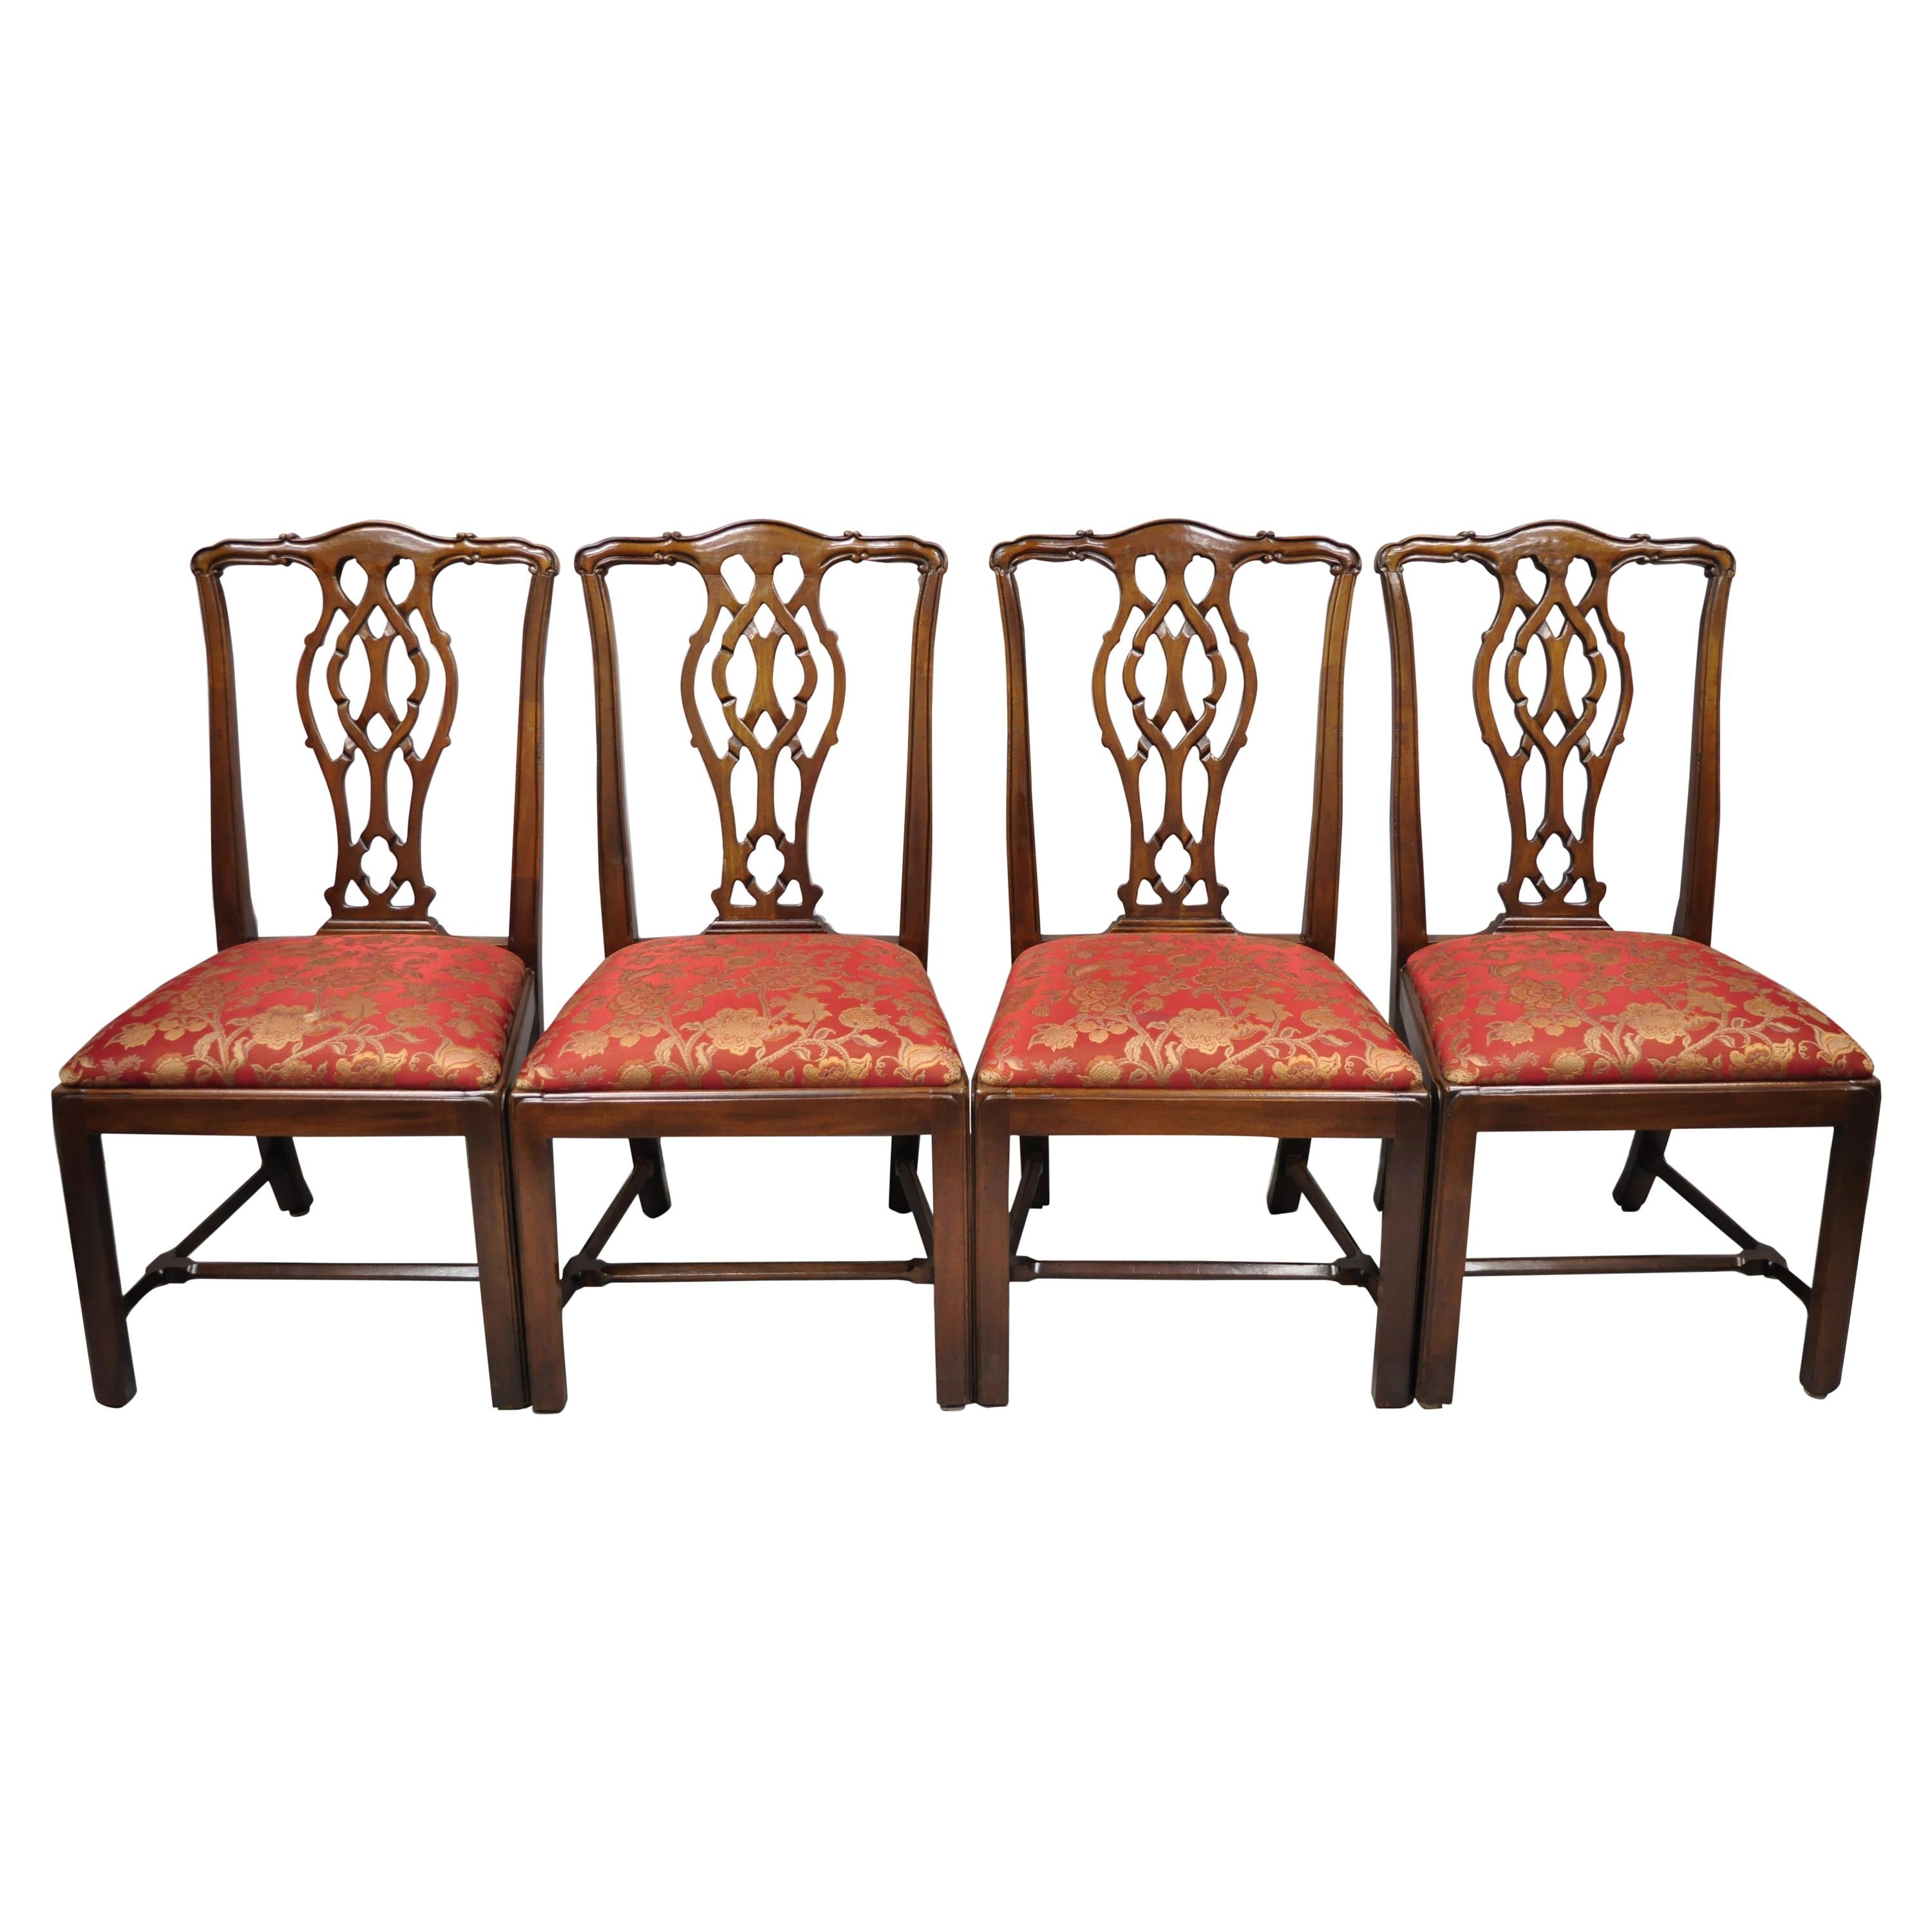 Set of 4 Mahogany Chippendale Style Dining Side Chairs Attributed to Bernhardt For Sale